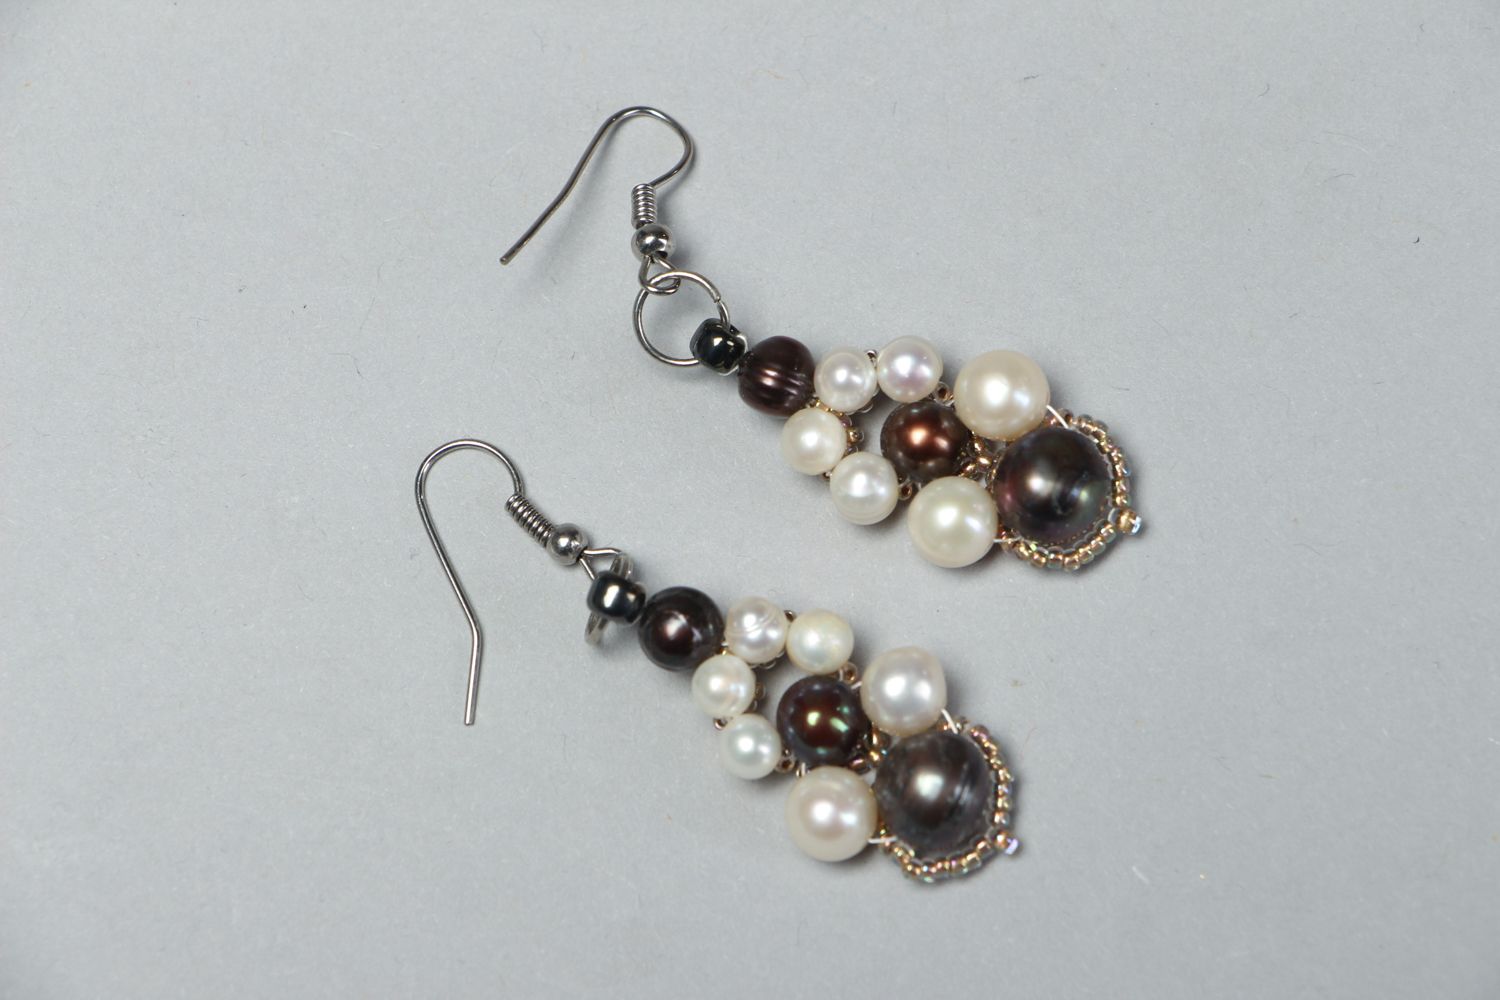 Handmade earrings with black and white pearls photo 1